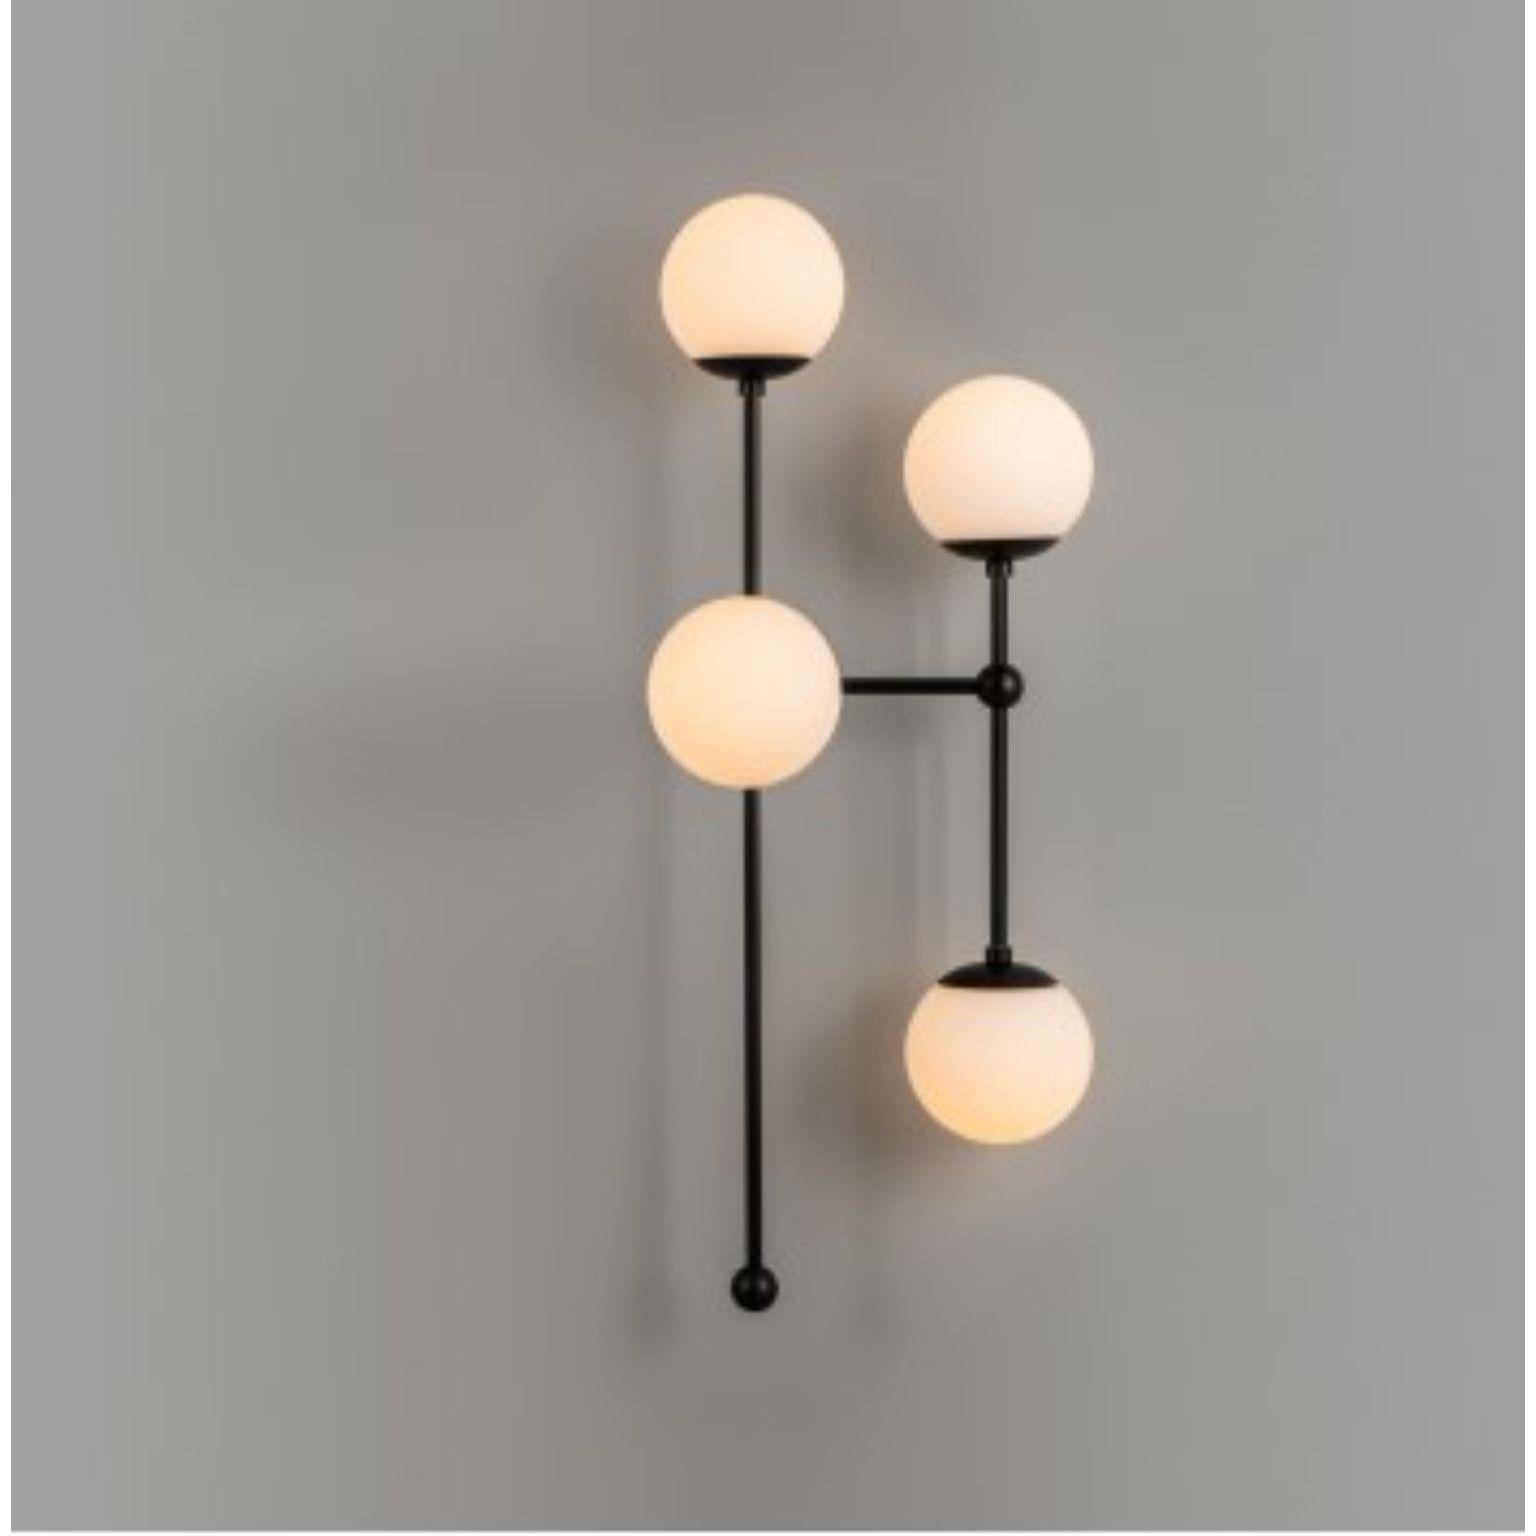 Armstrong 4 R wall sconce by Schwung
Dimensions: W 35 x D 33 x H 92 cm
Materials: Brass, opal glass
Weight: 6 kg

Finishes available: Black gunmetal, polished nickel, brass
Other sizes available.

 Schwung is a german word, and loosely